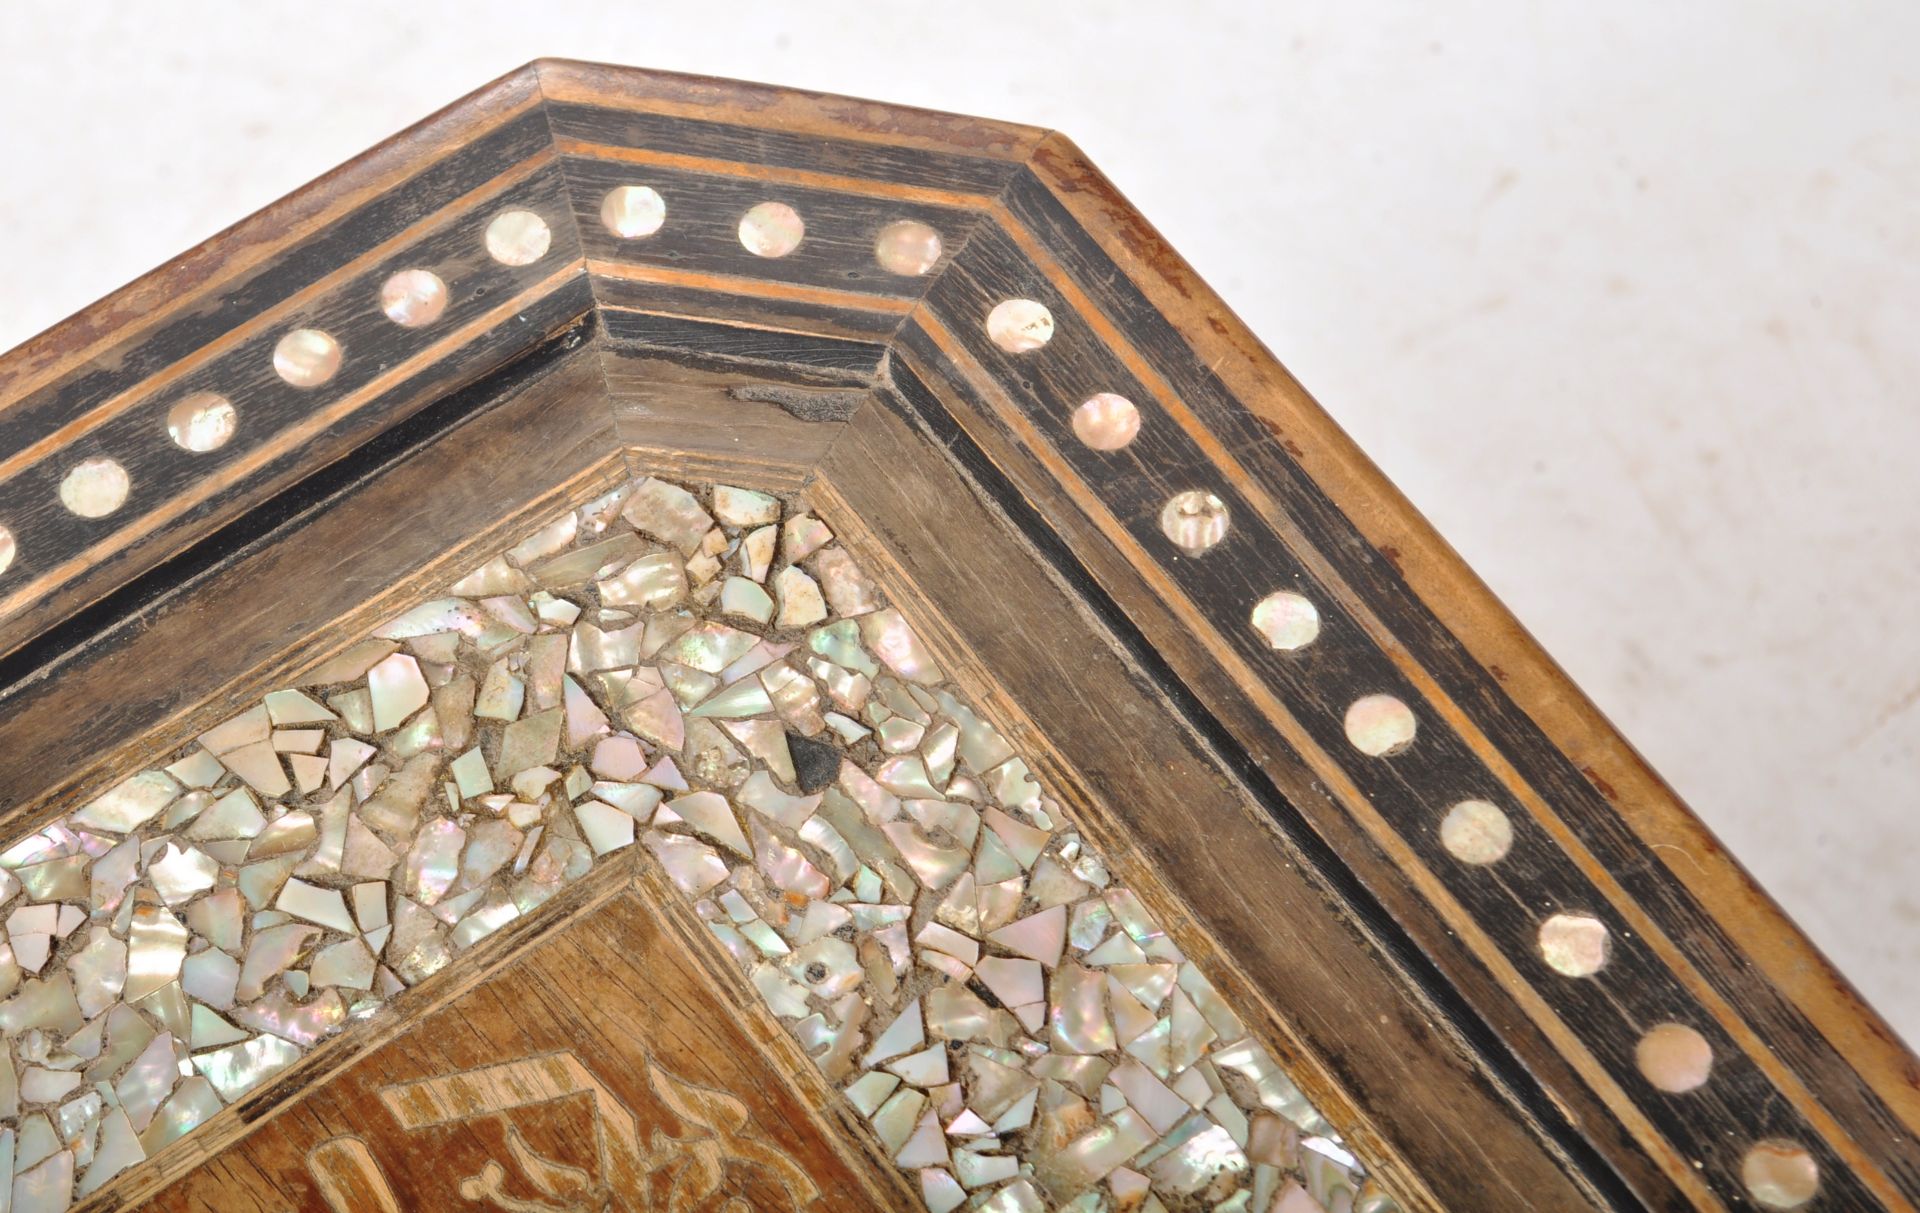 19TH CENTURY MIDDLE EASTERN ISLAMIC INLAID TABLE STAND - Image 7 of 7